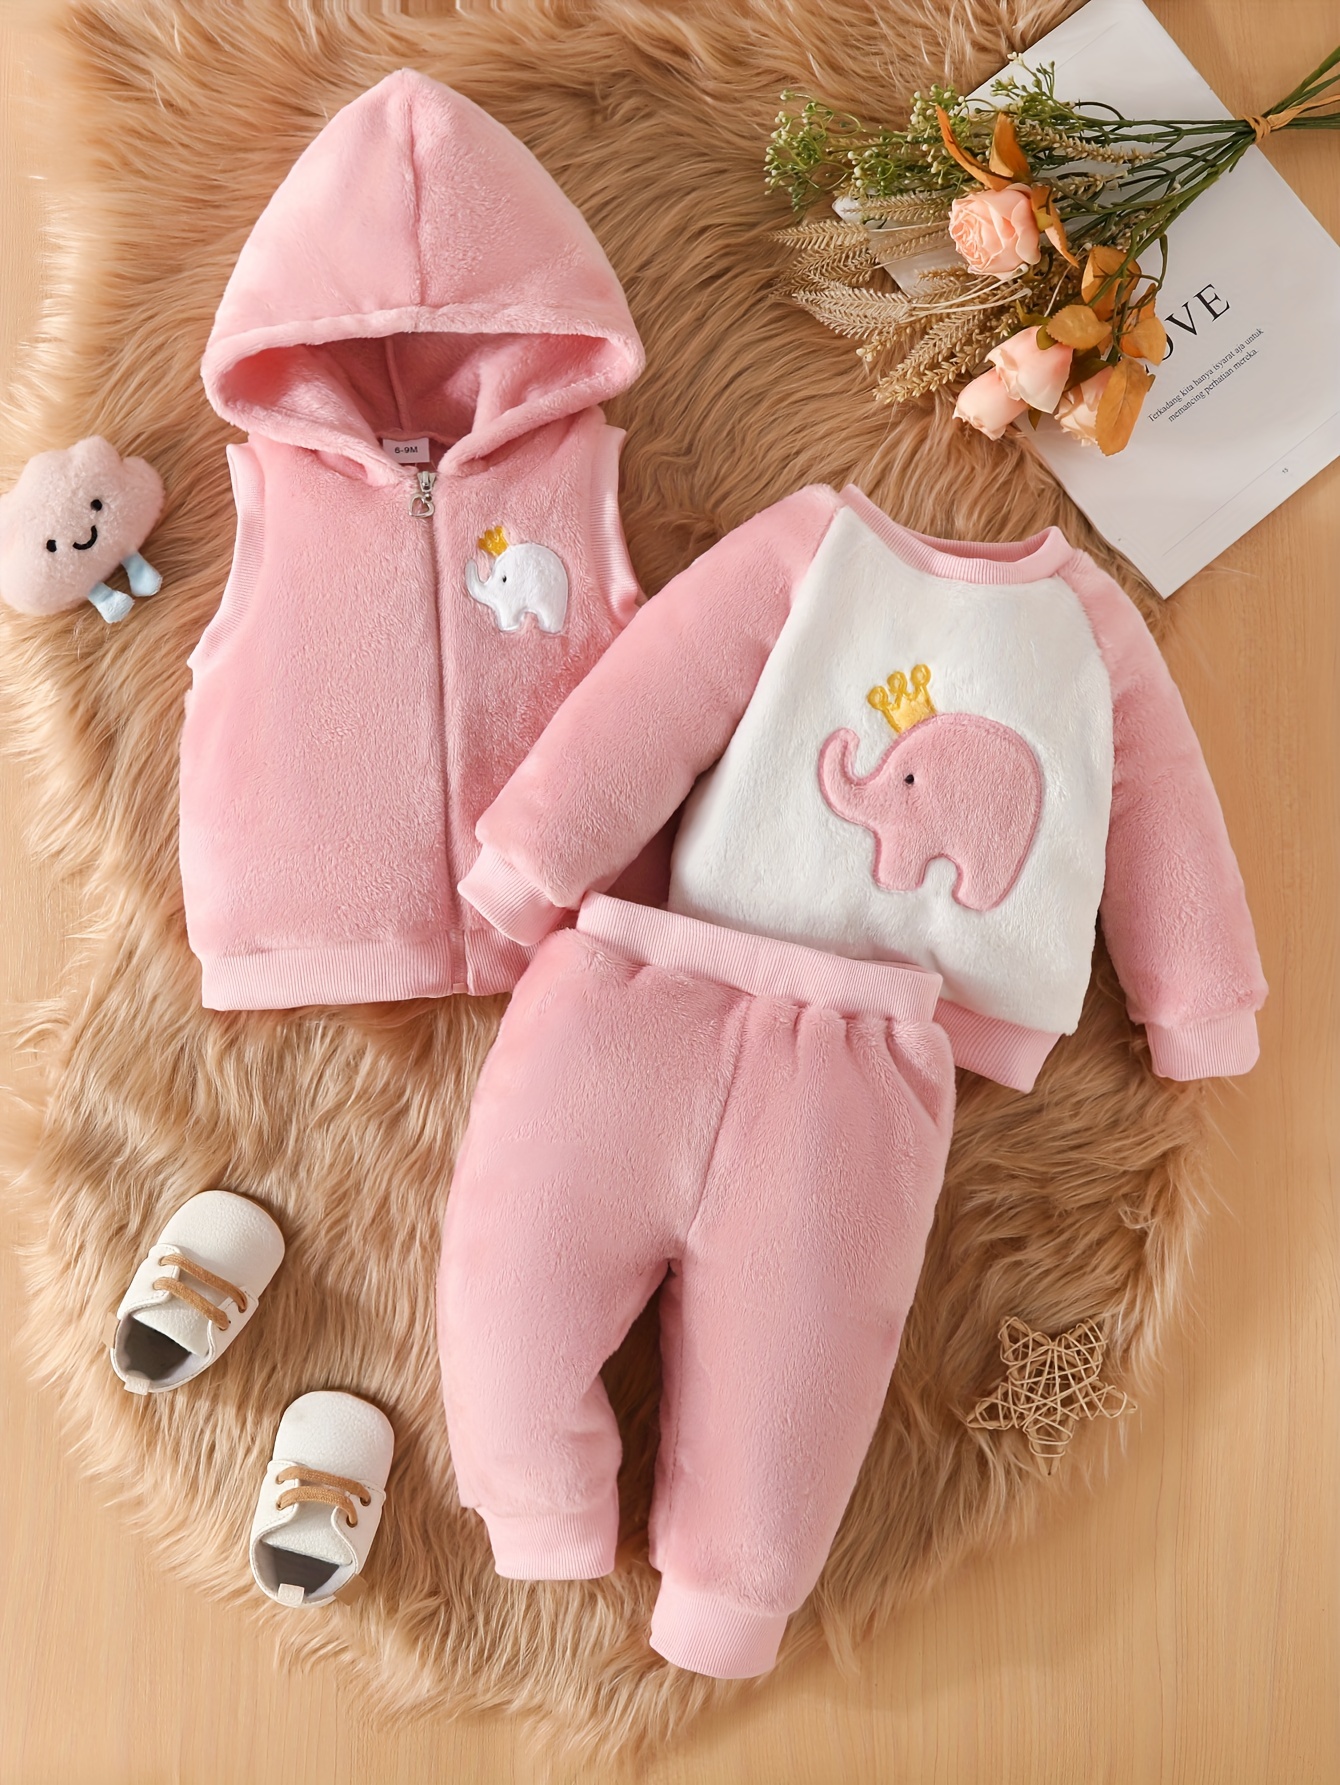 Plus Size Two Piece Set Children's Clothing Winter Children's Clothing Baby  Three-piece Set Girls Boys Winter Clothing Suits Two Piece Outfit on  Clearance 